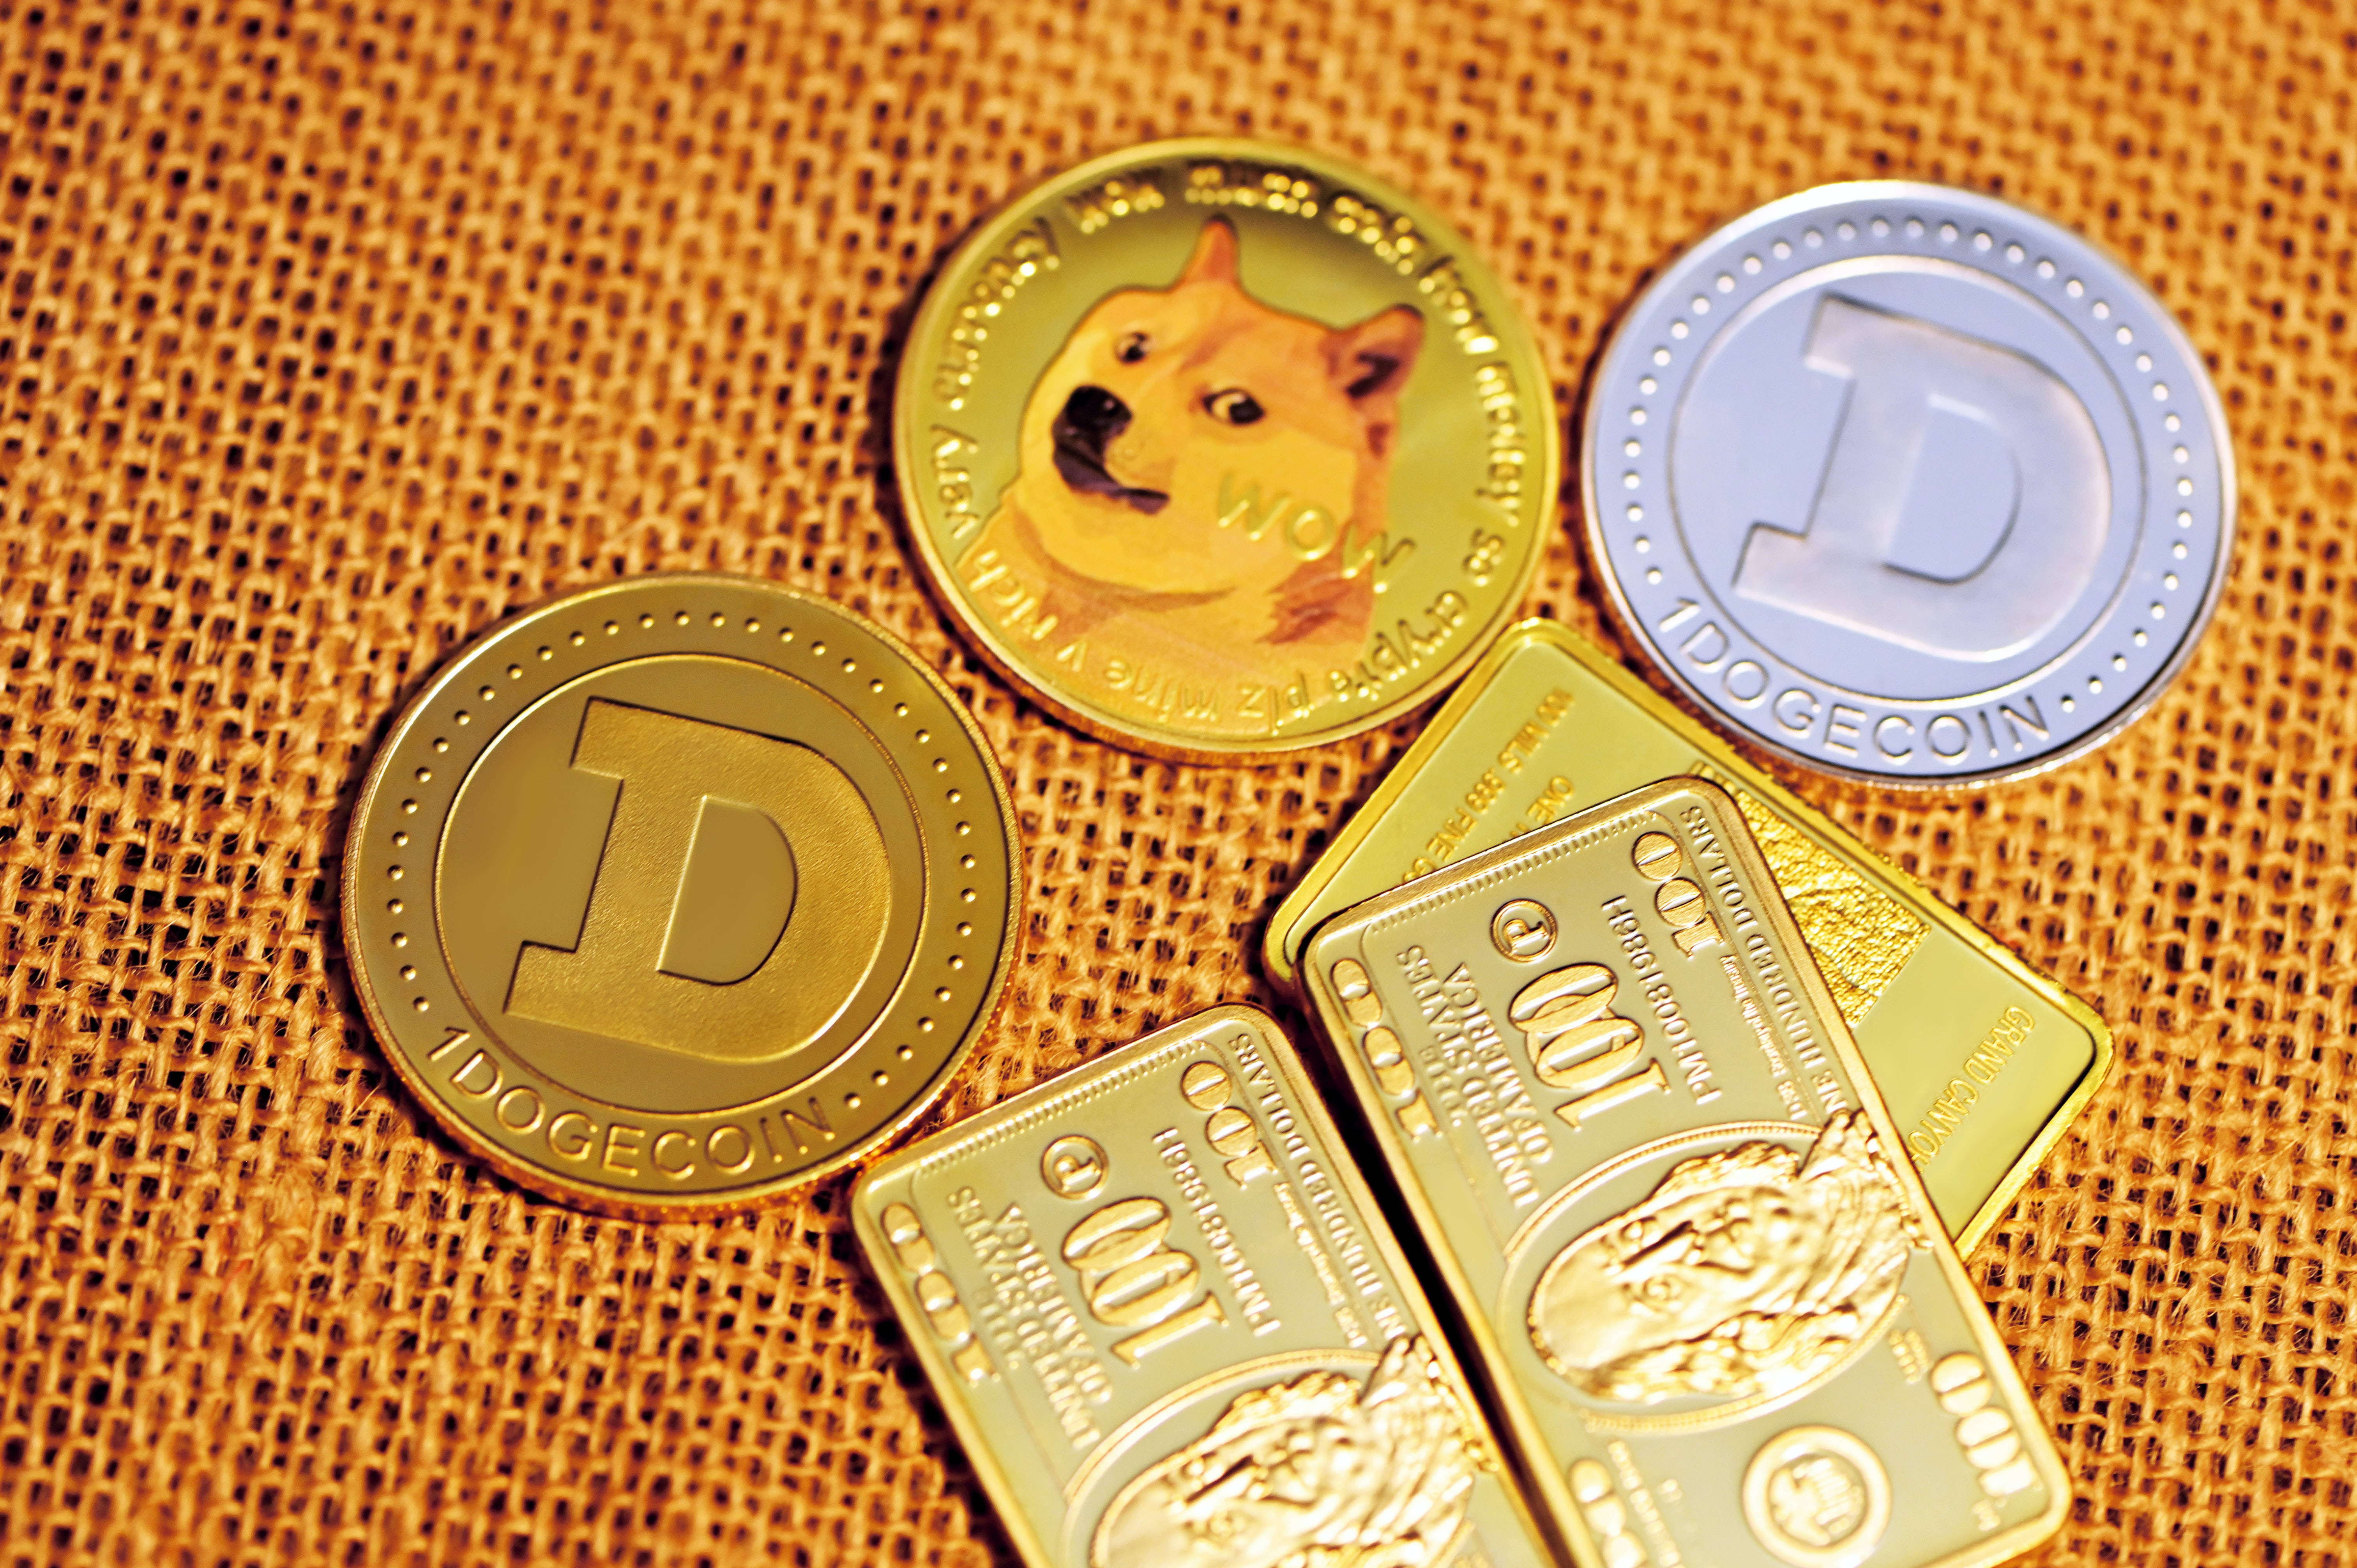 Dogecoin Currency Wallpapers